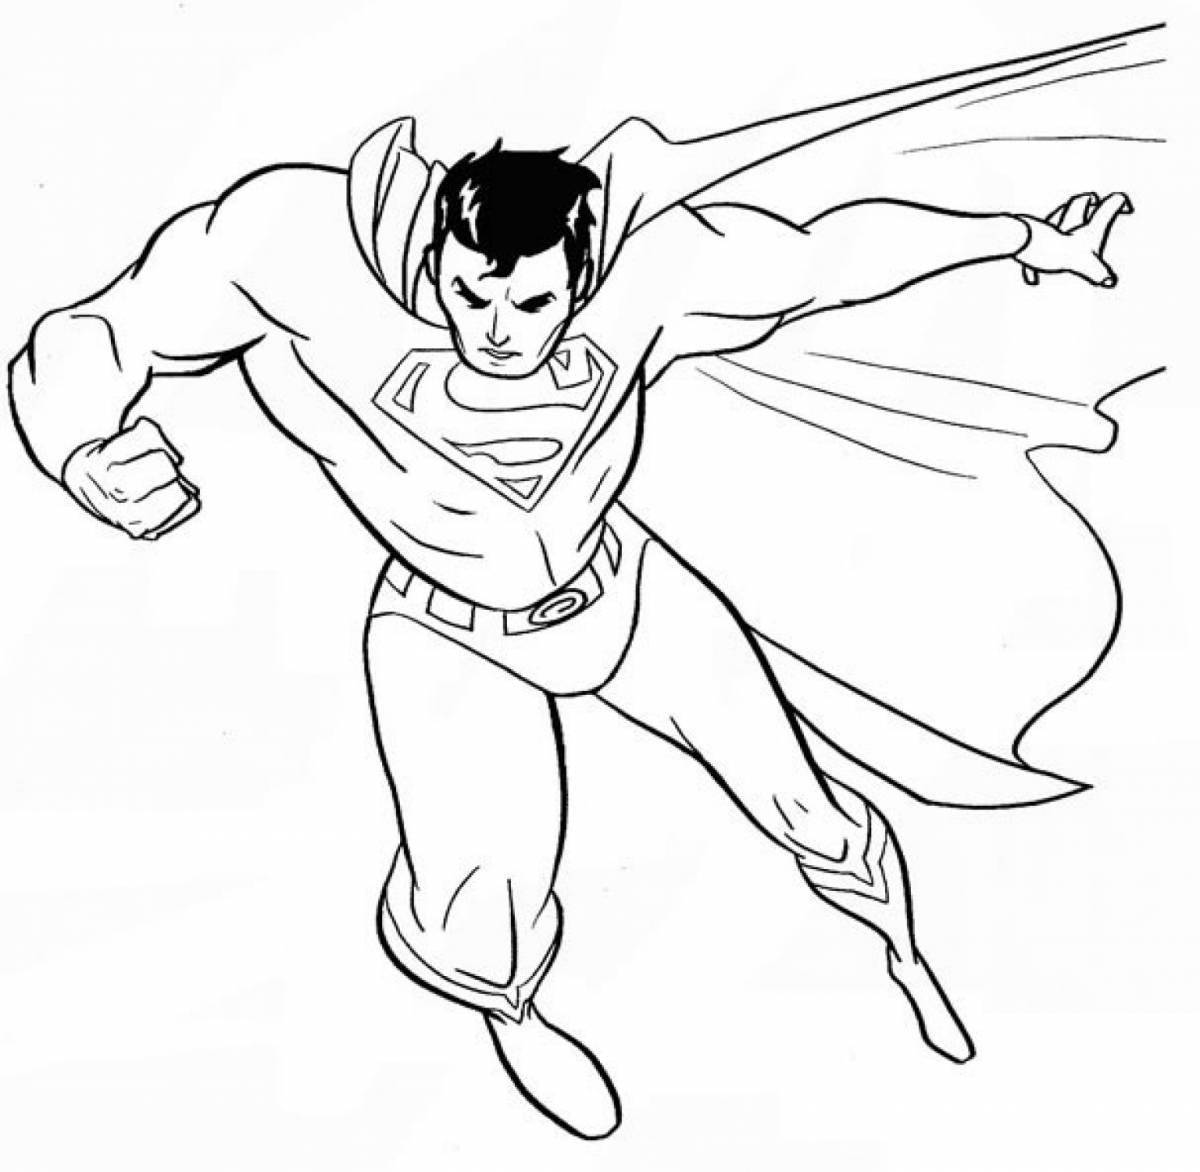 Superman fantasy coloring book for 3-4 year olds